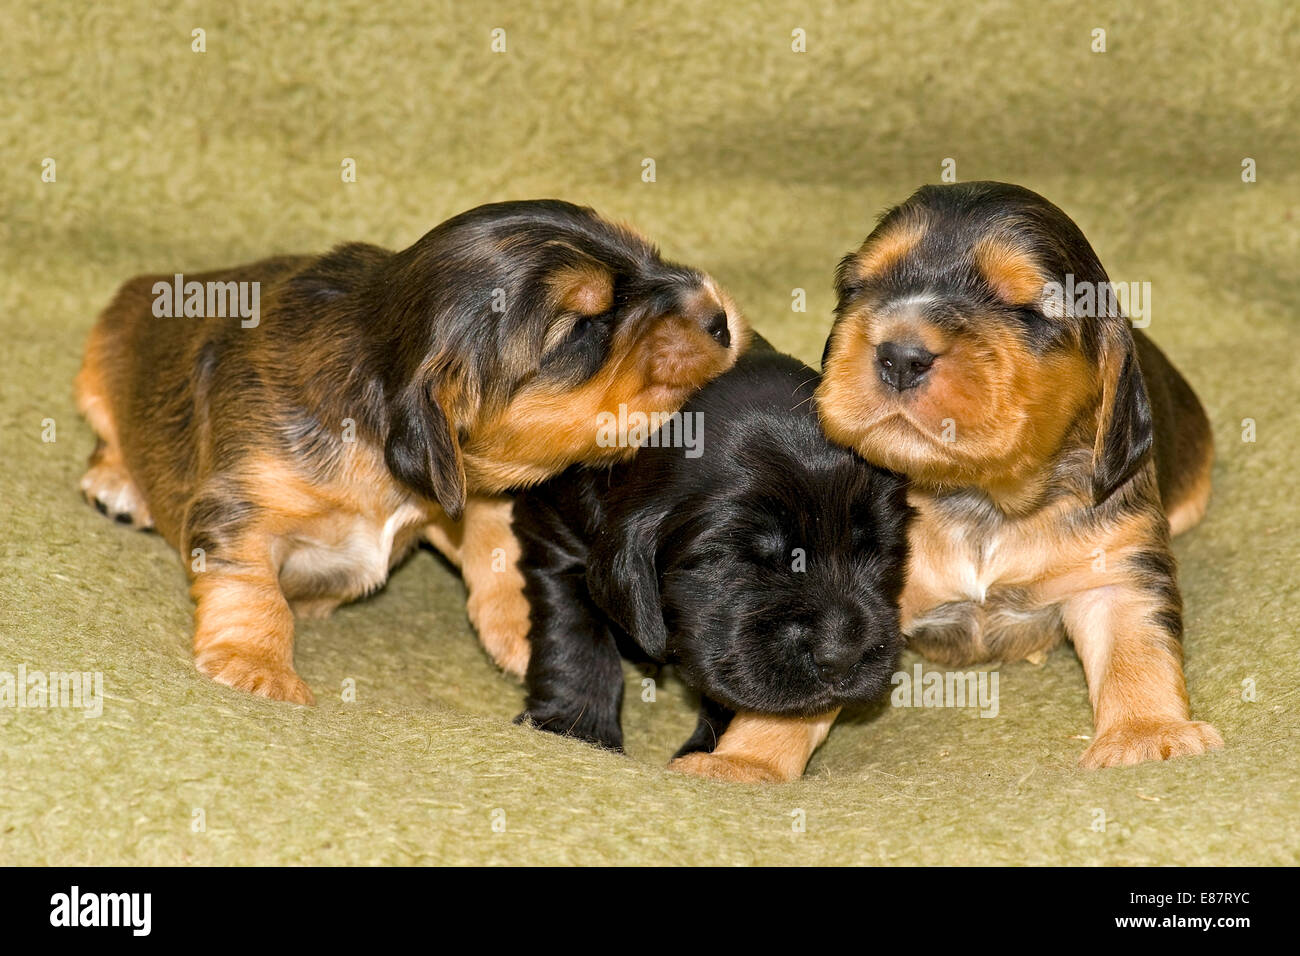 Cocker Spaniels, dog breed, puppies Stock Photo